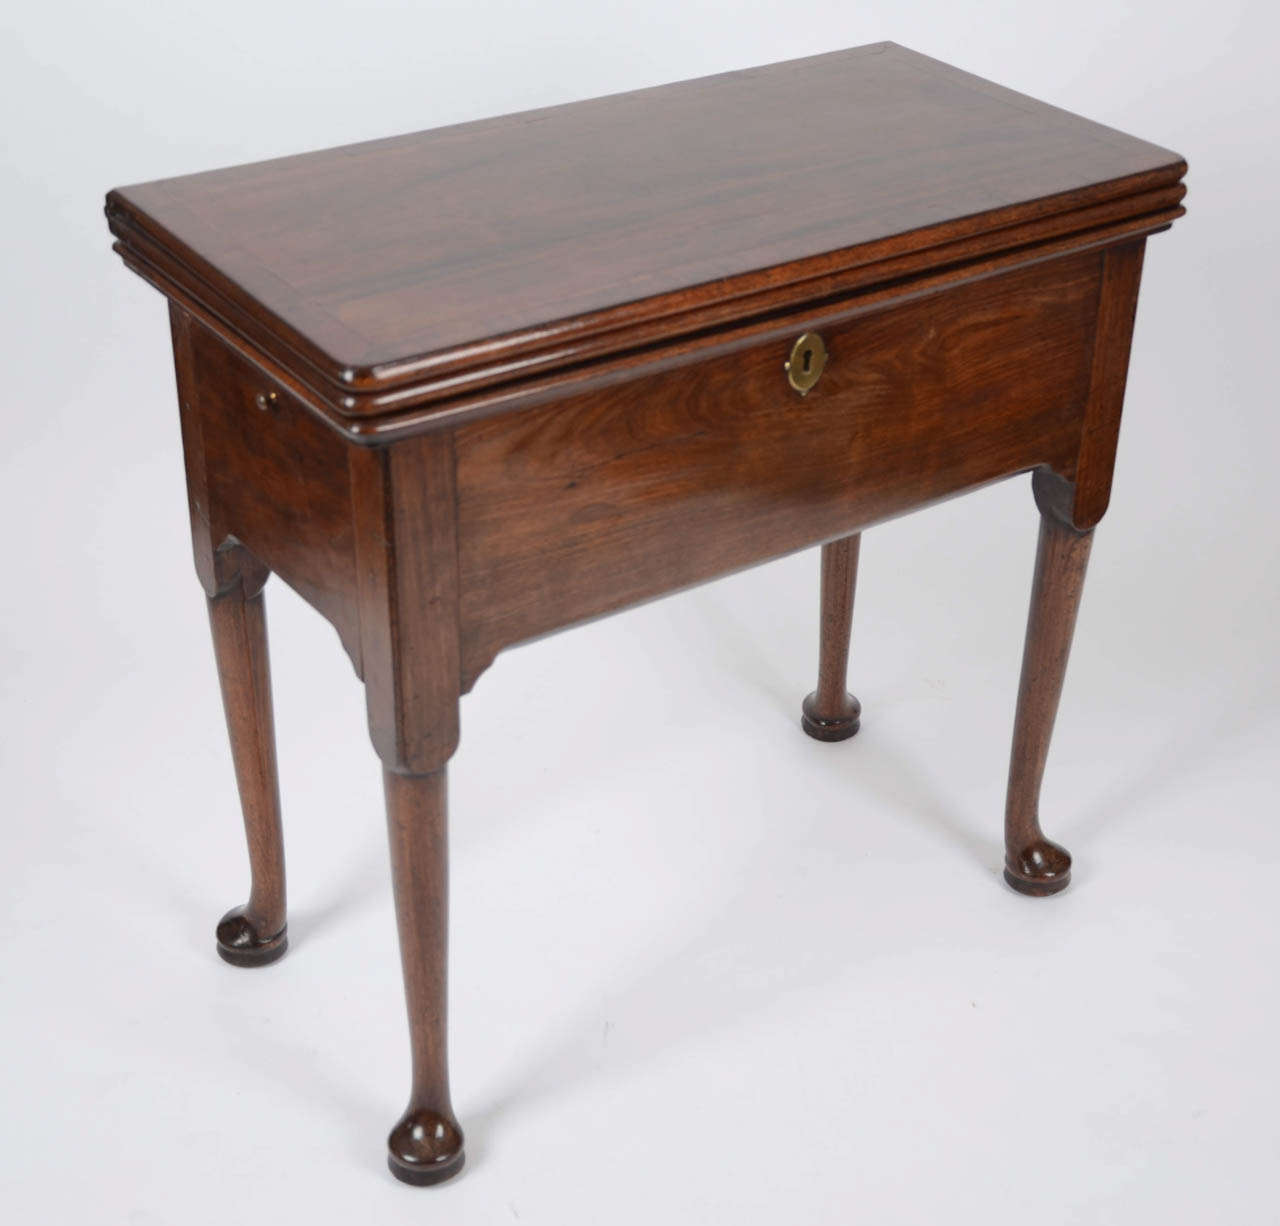 This very ingenious pier/tea/games bureau-table reflects the George II French style and fascination for metamorphic furniture as favoured in the 1730s for fashionable London parlours and reception rooms.   The crossbanded and featherbanded top